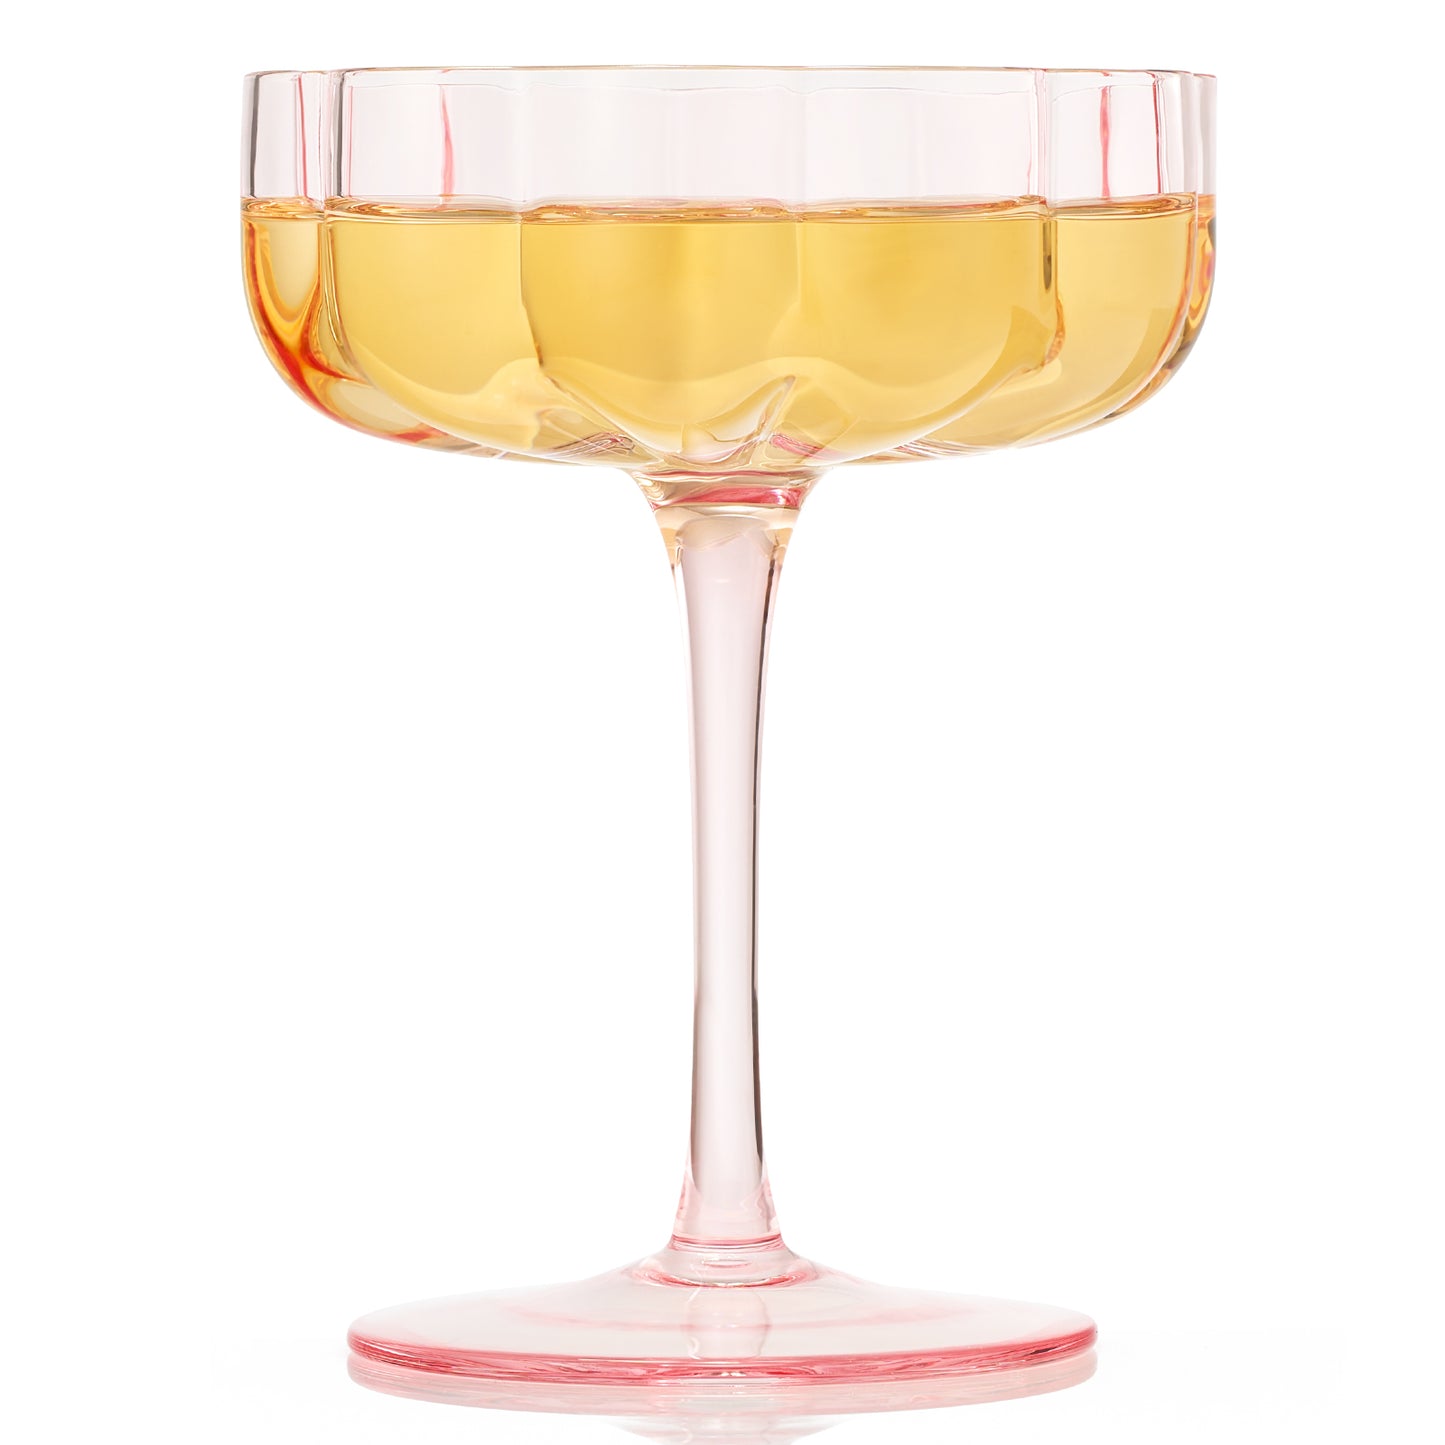 Flower Wave Coupe Cocktail Glassware, Set of 4